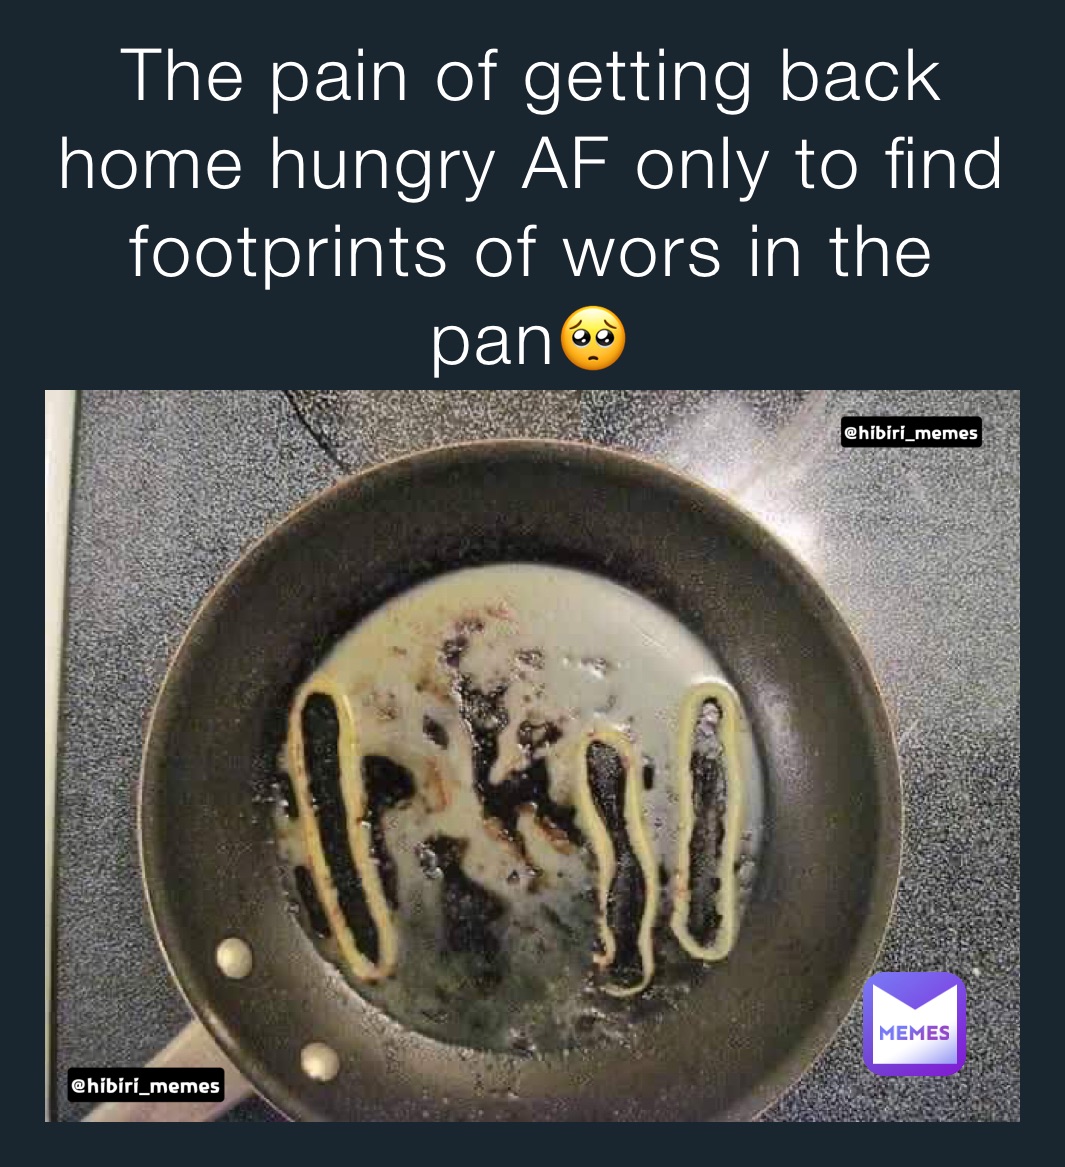 The pain of getting back home hungry AF only to find footprints of wors in the pan🥺